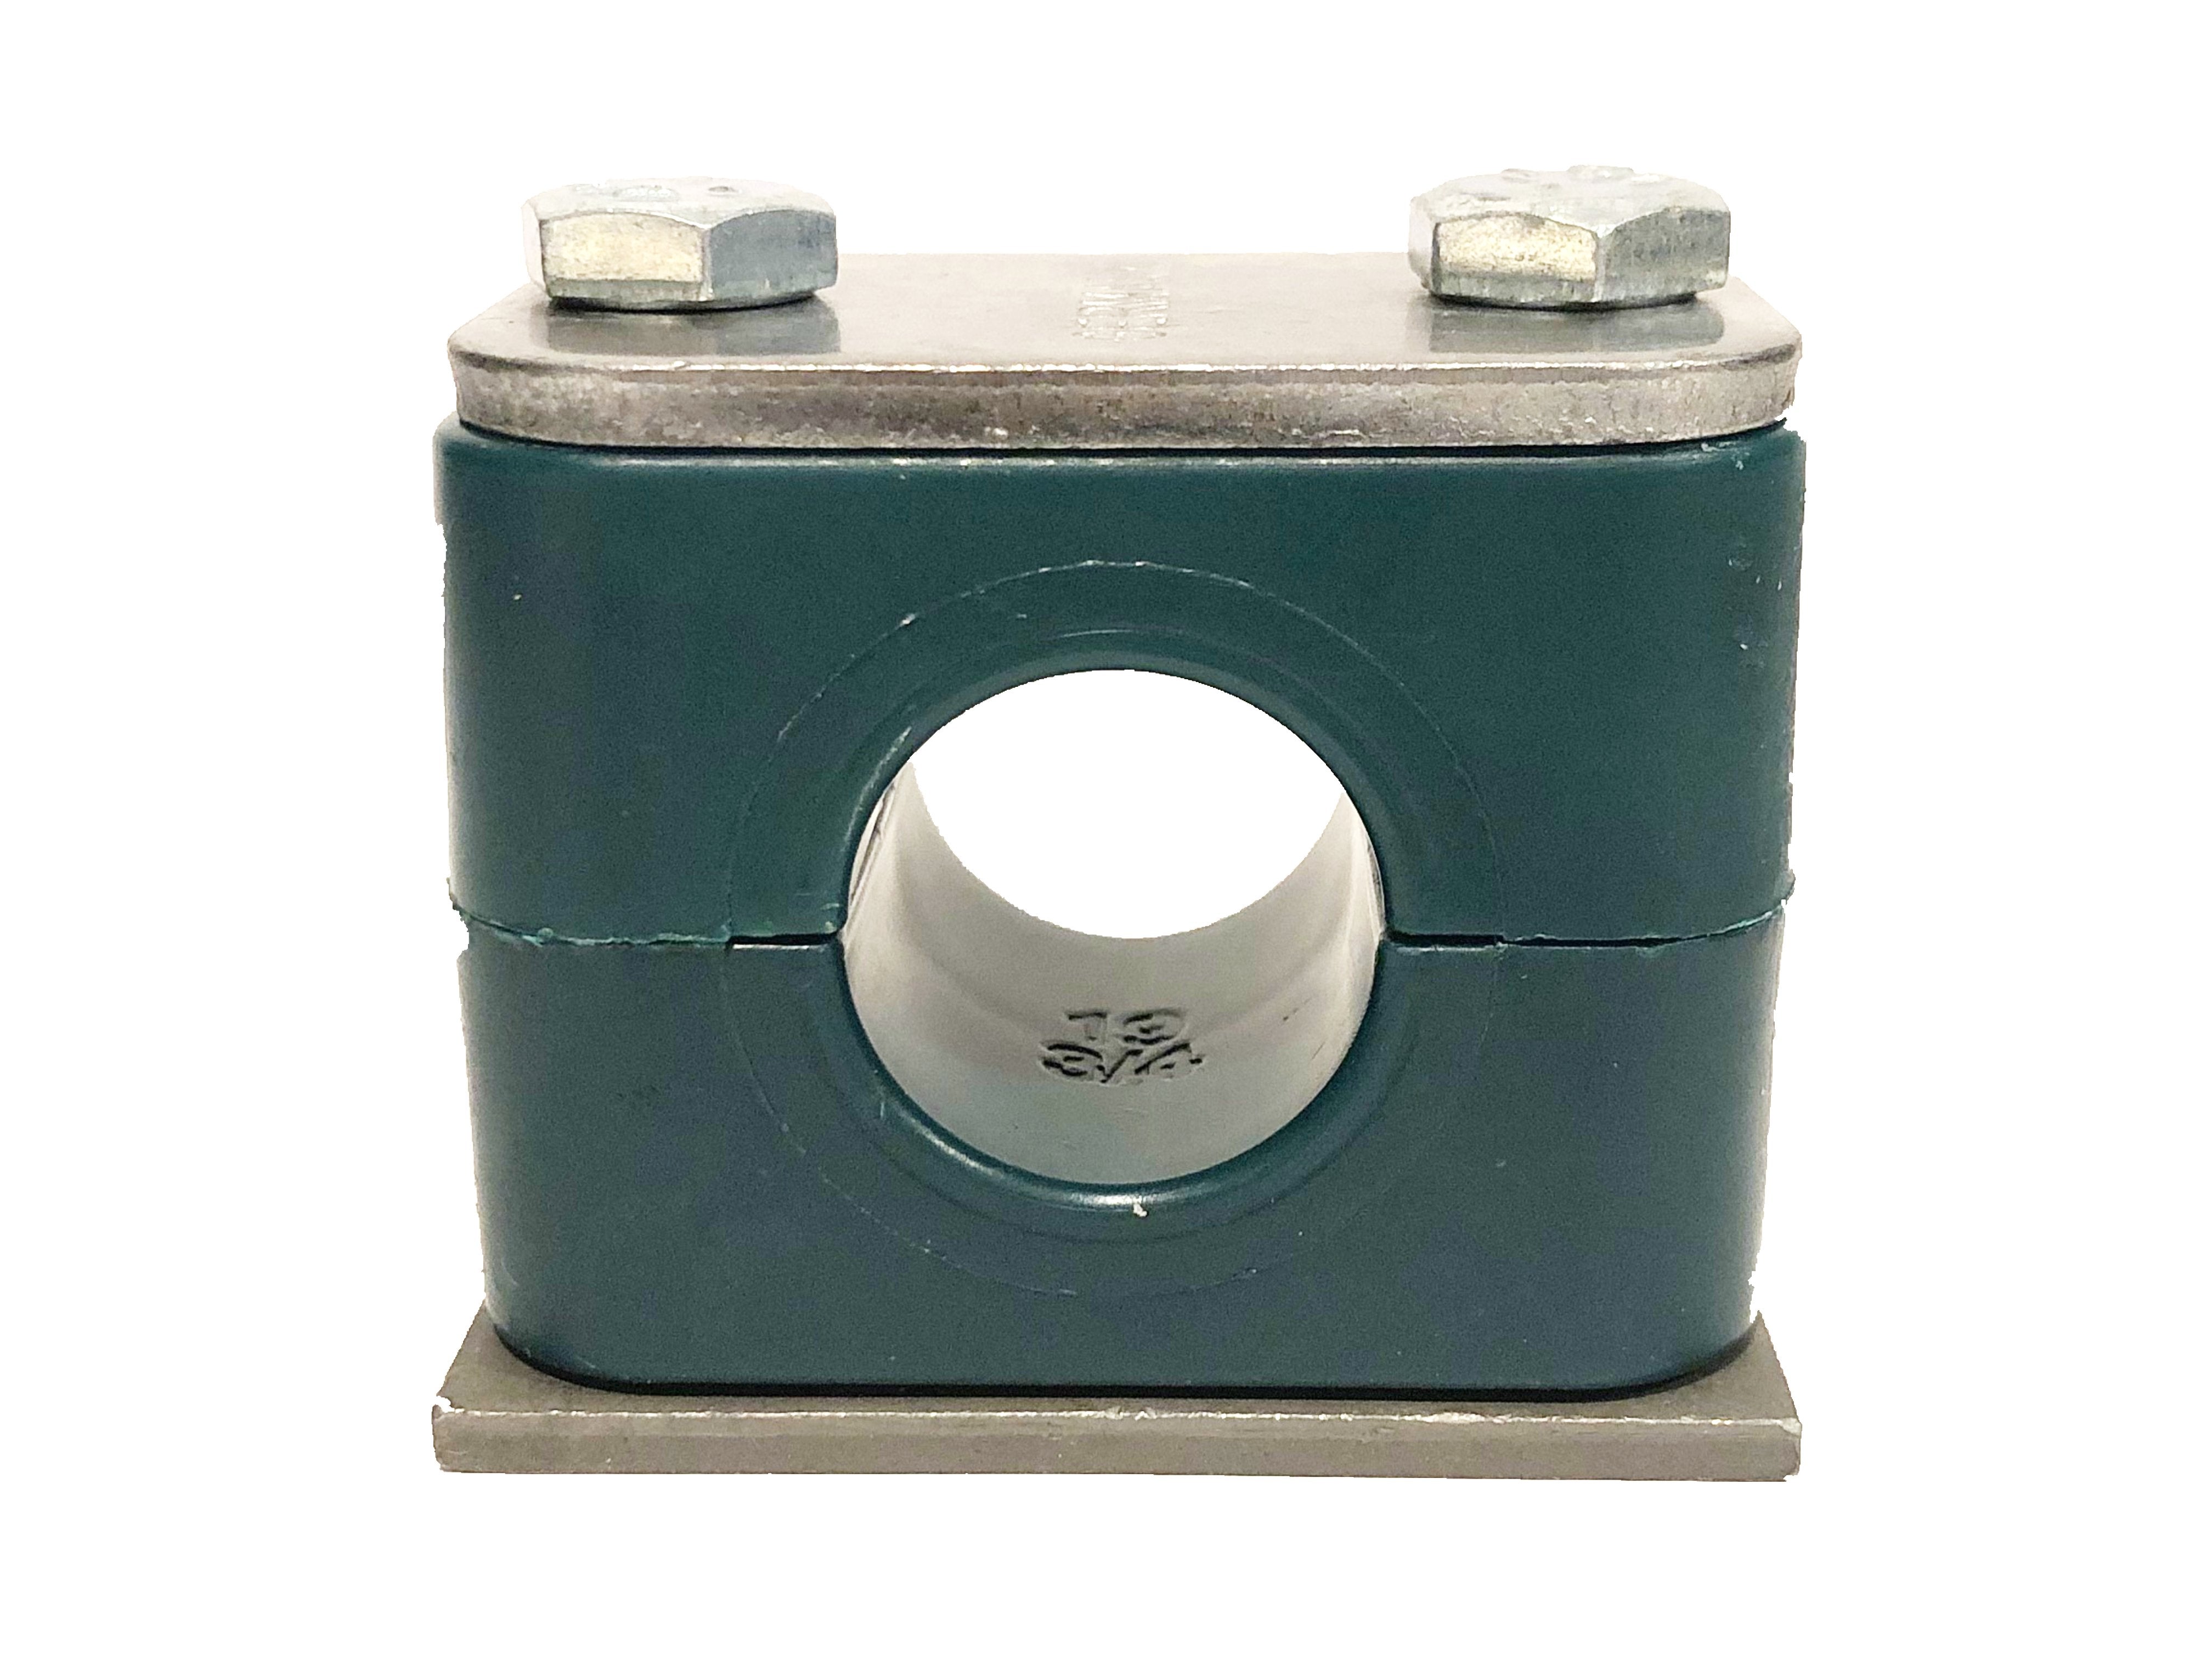 SP-426.9-PP-H-DP-AS-U-W5 : Stauff Clamp, Single Weld Plate, 1.06" (26.9mm) OD, for 3/4" Pipe, Green PP Insert, Smooth Interior, 316SS